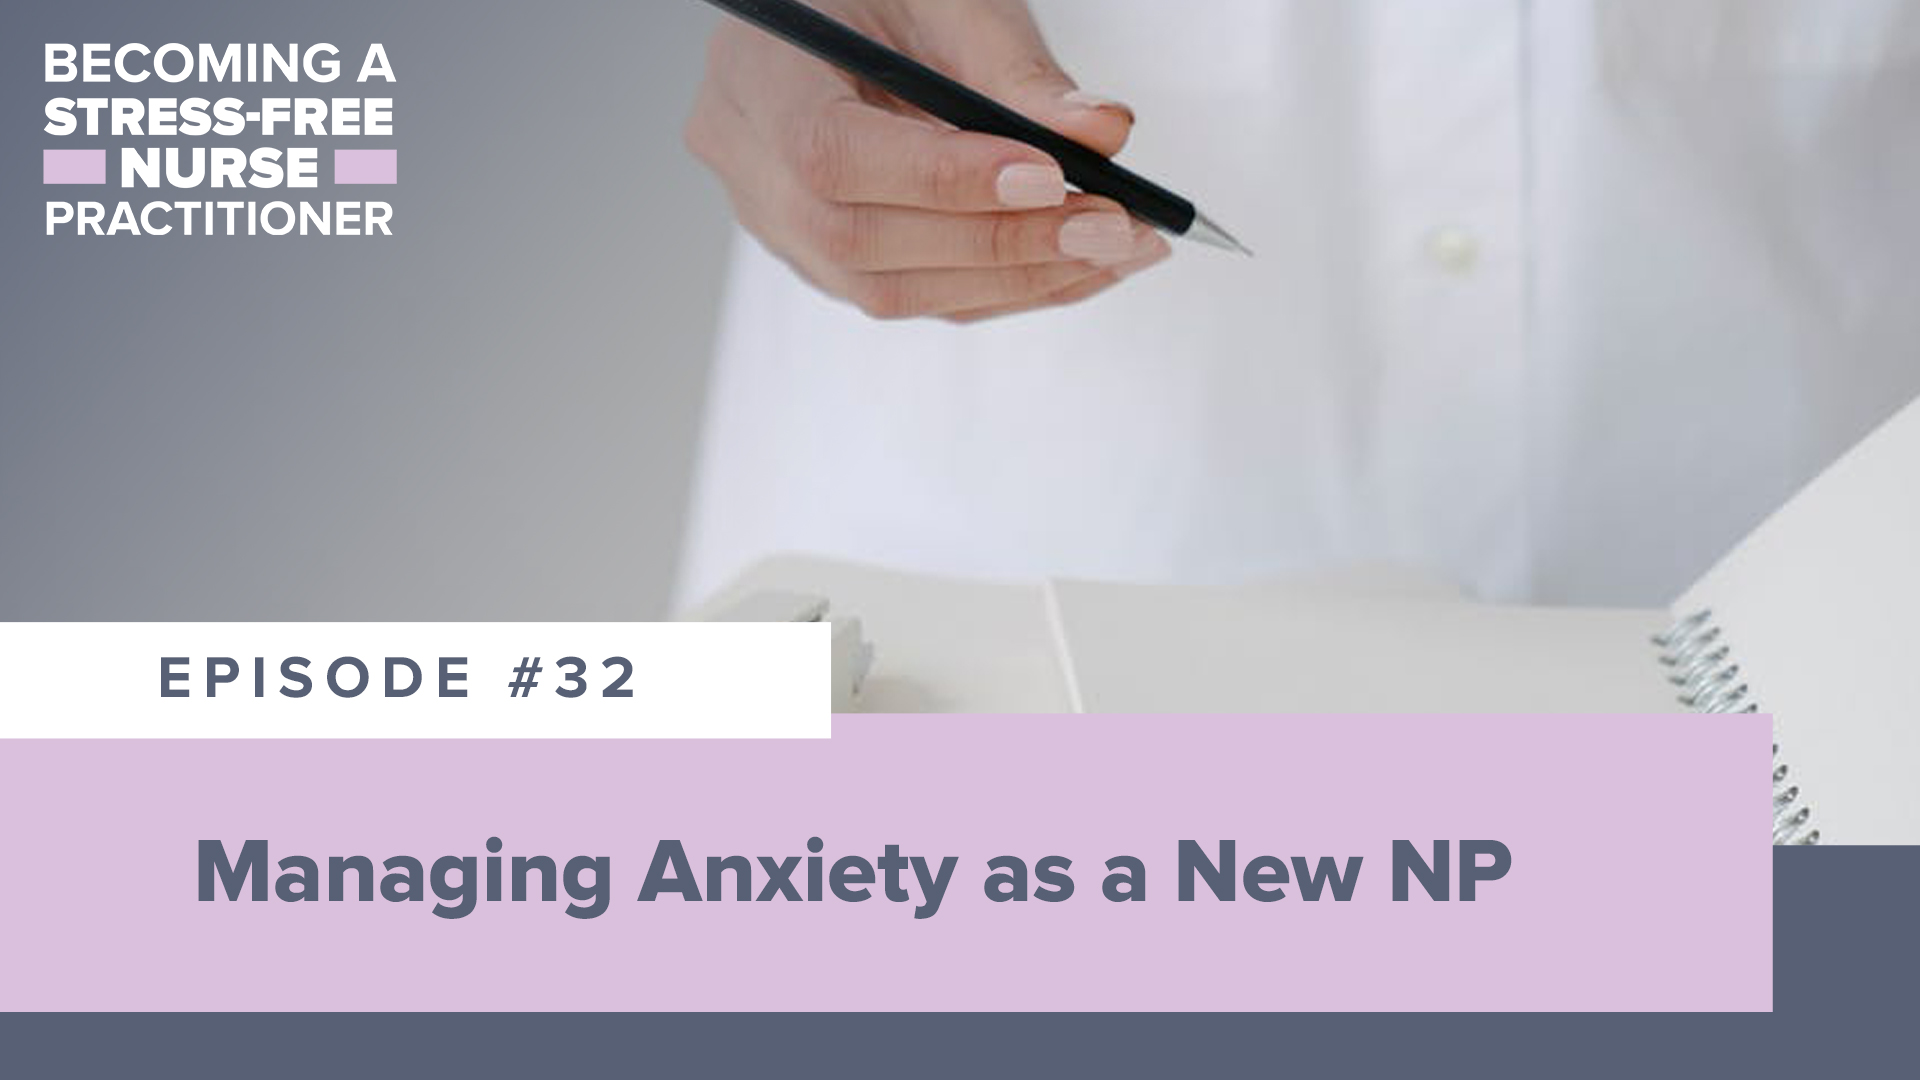 SMNP Blog - Ep #32: Managing Anxiety as a New NP [NEW NP]